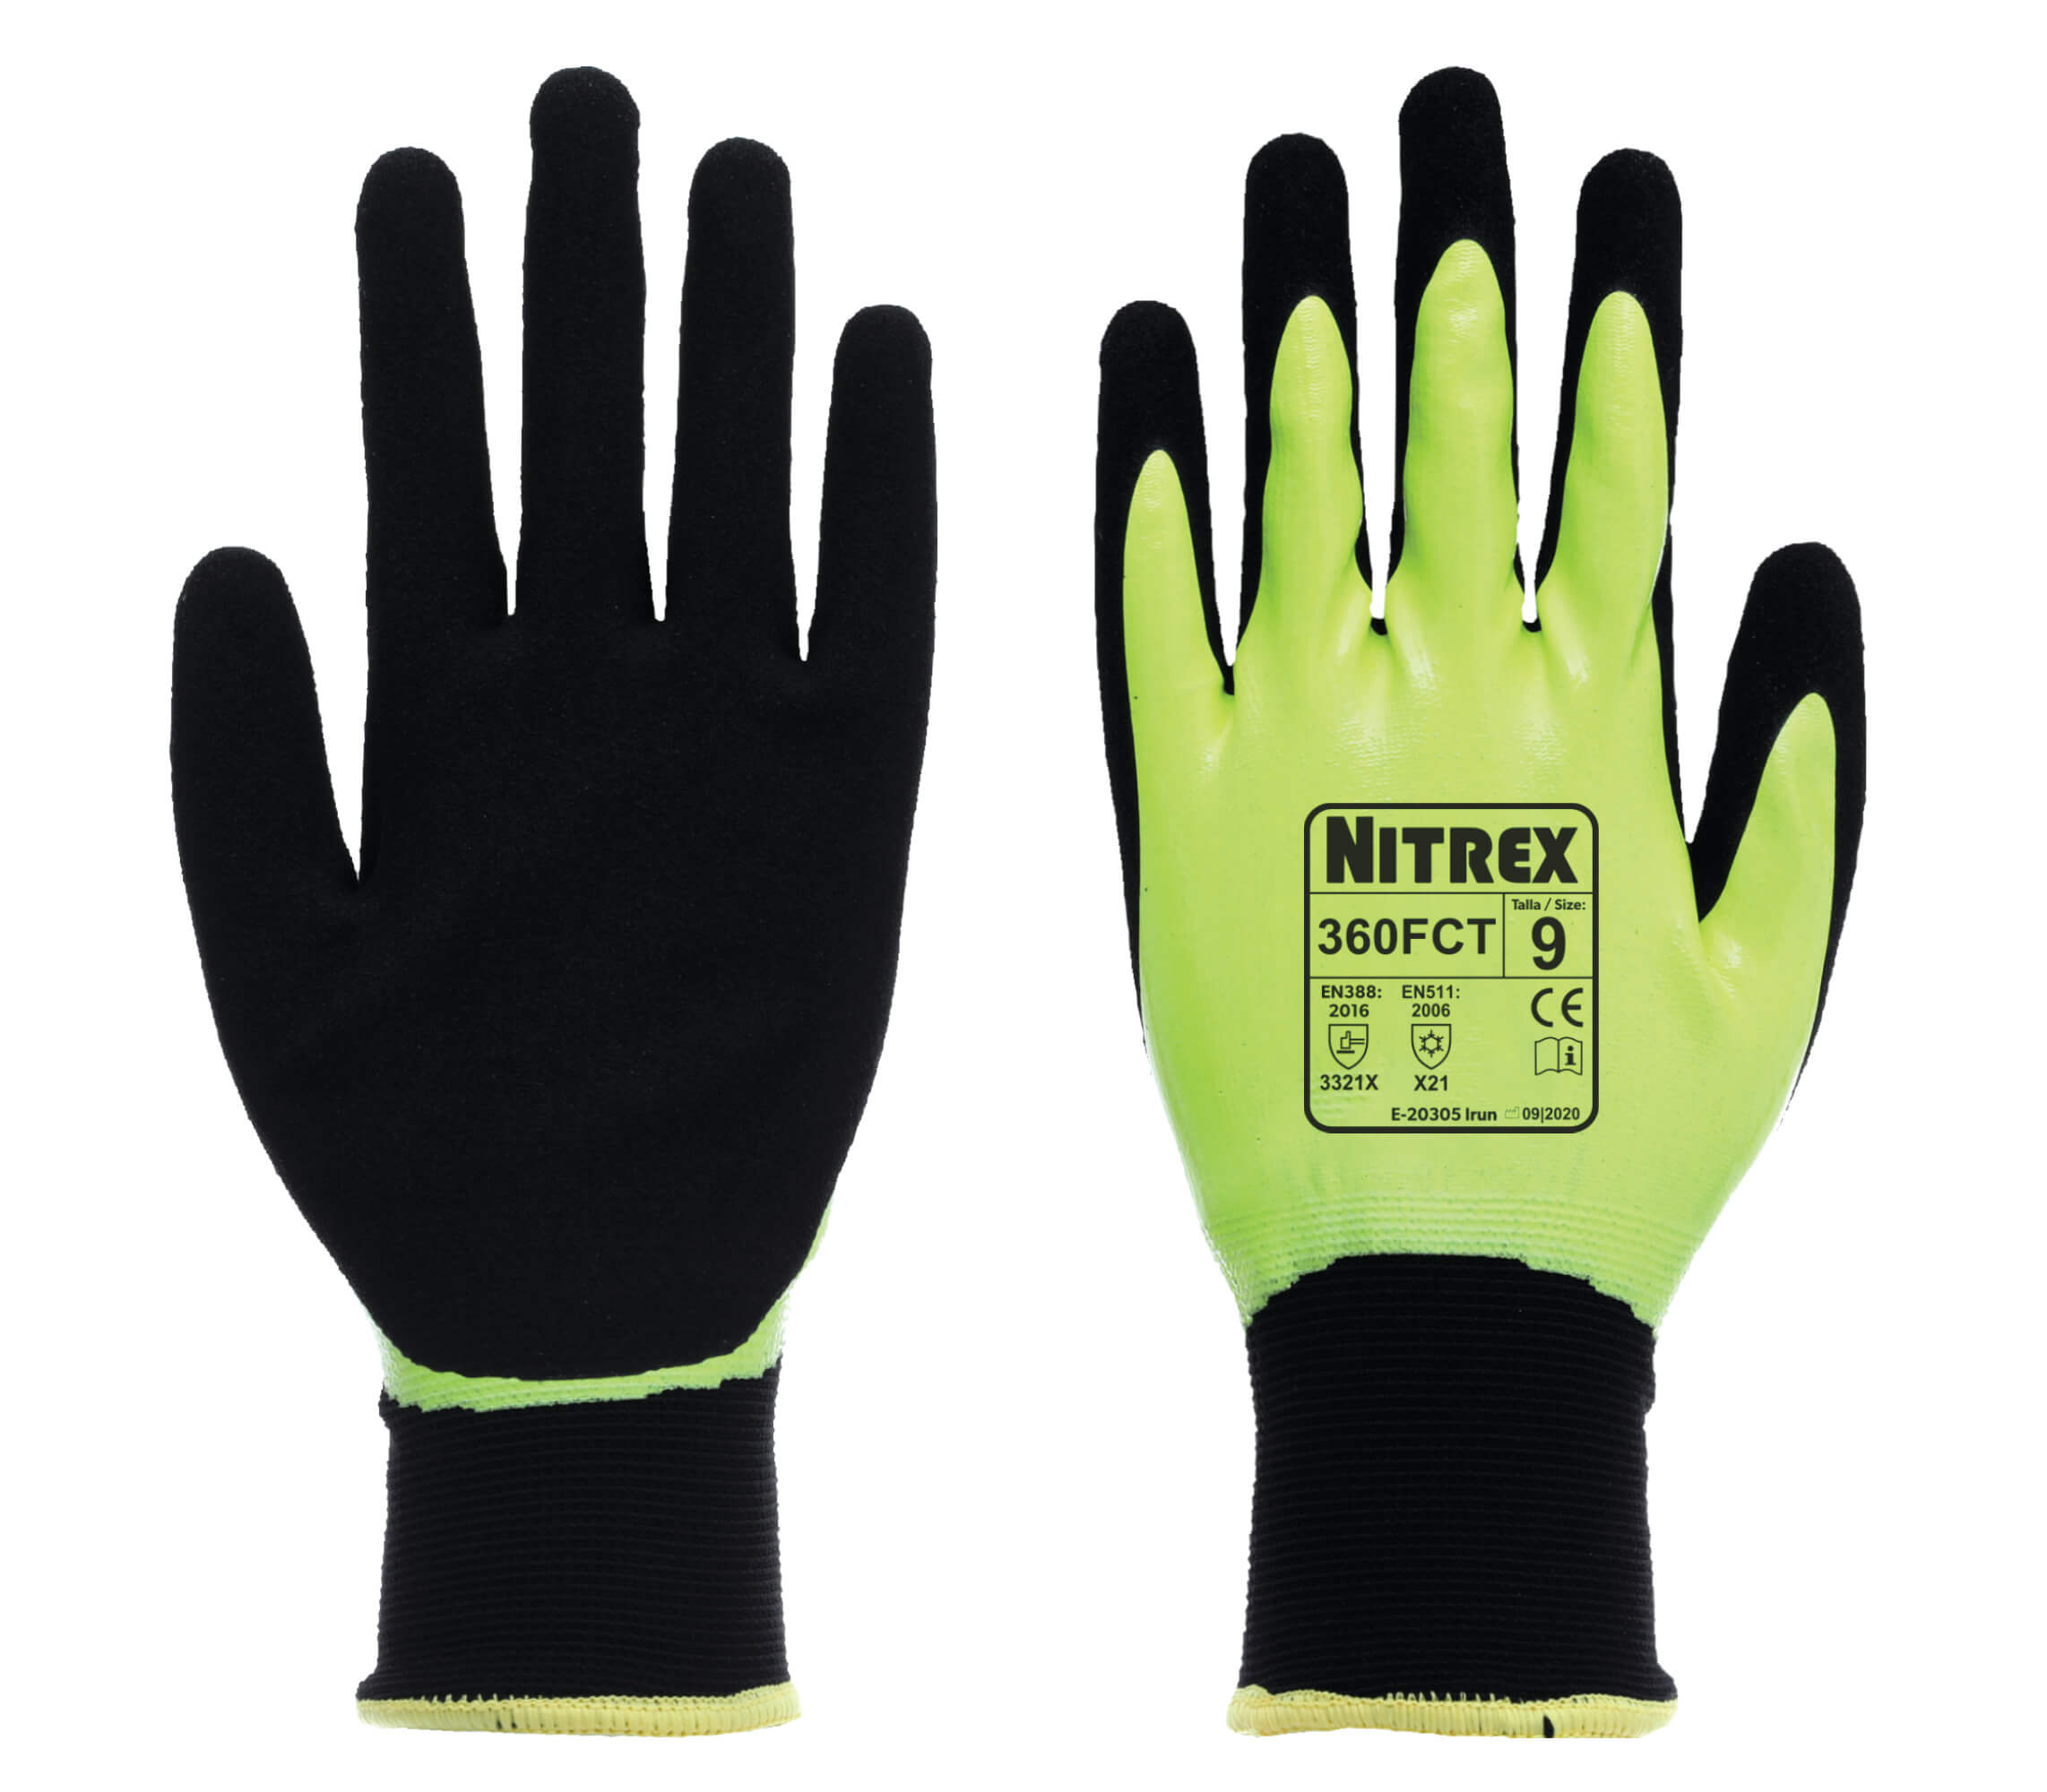 Nitrex 360FCT - Hi-Viz Firm Grip Thermal Work Gloves - Moisture Protection - Abrasion & Tear Protection - Size 7/Small